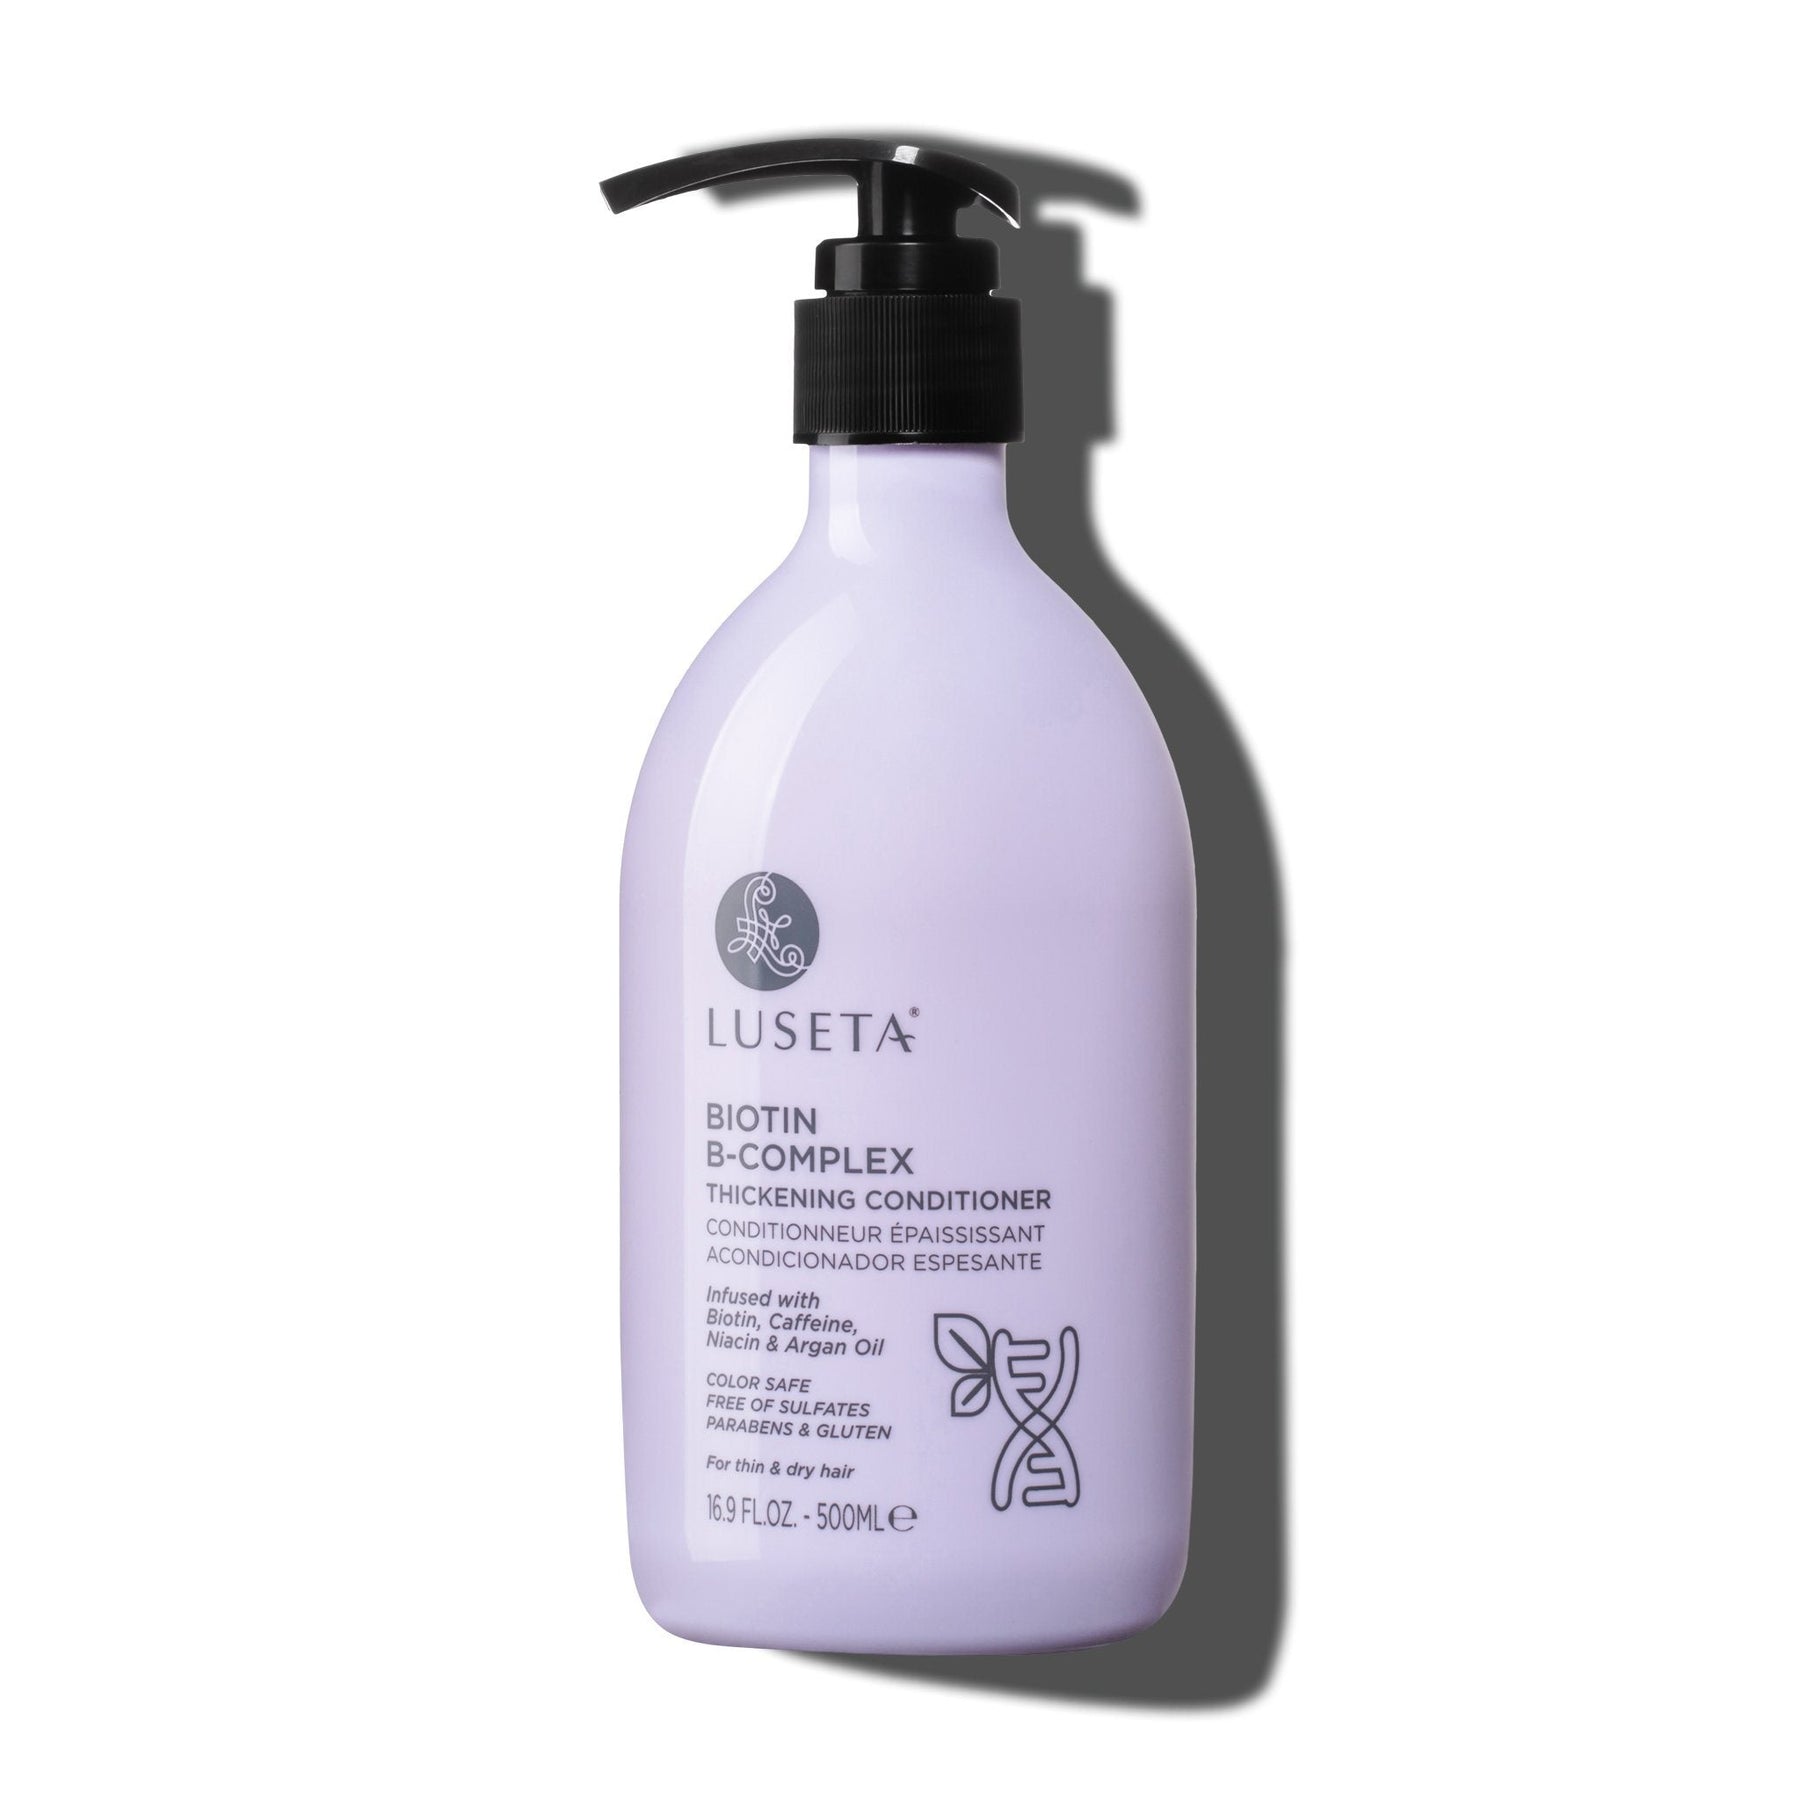 Biotin B-Complex Thickening Conditioner - by Luseta Beauty |ProCare Outlet|